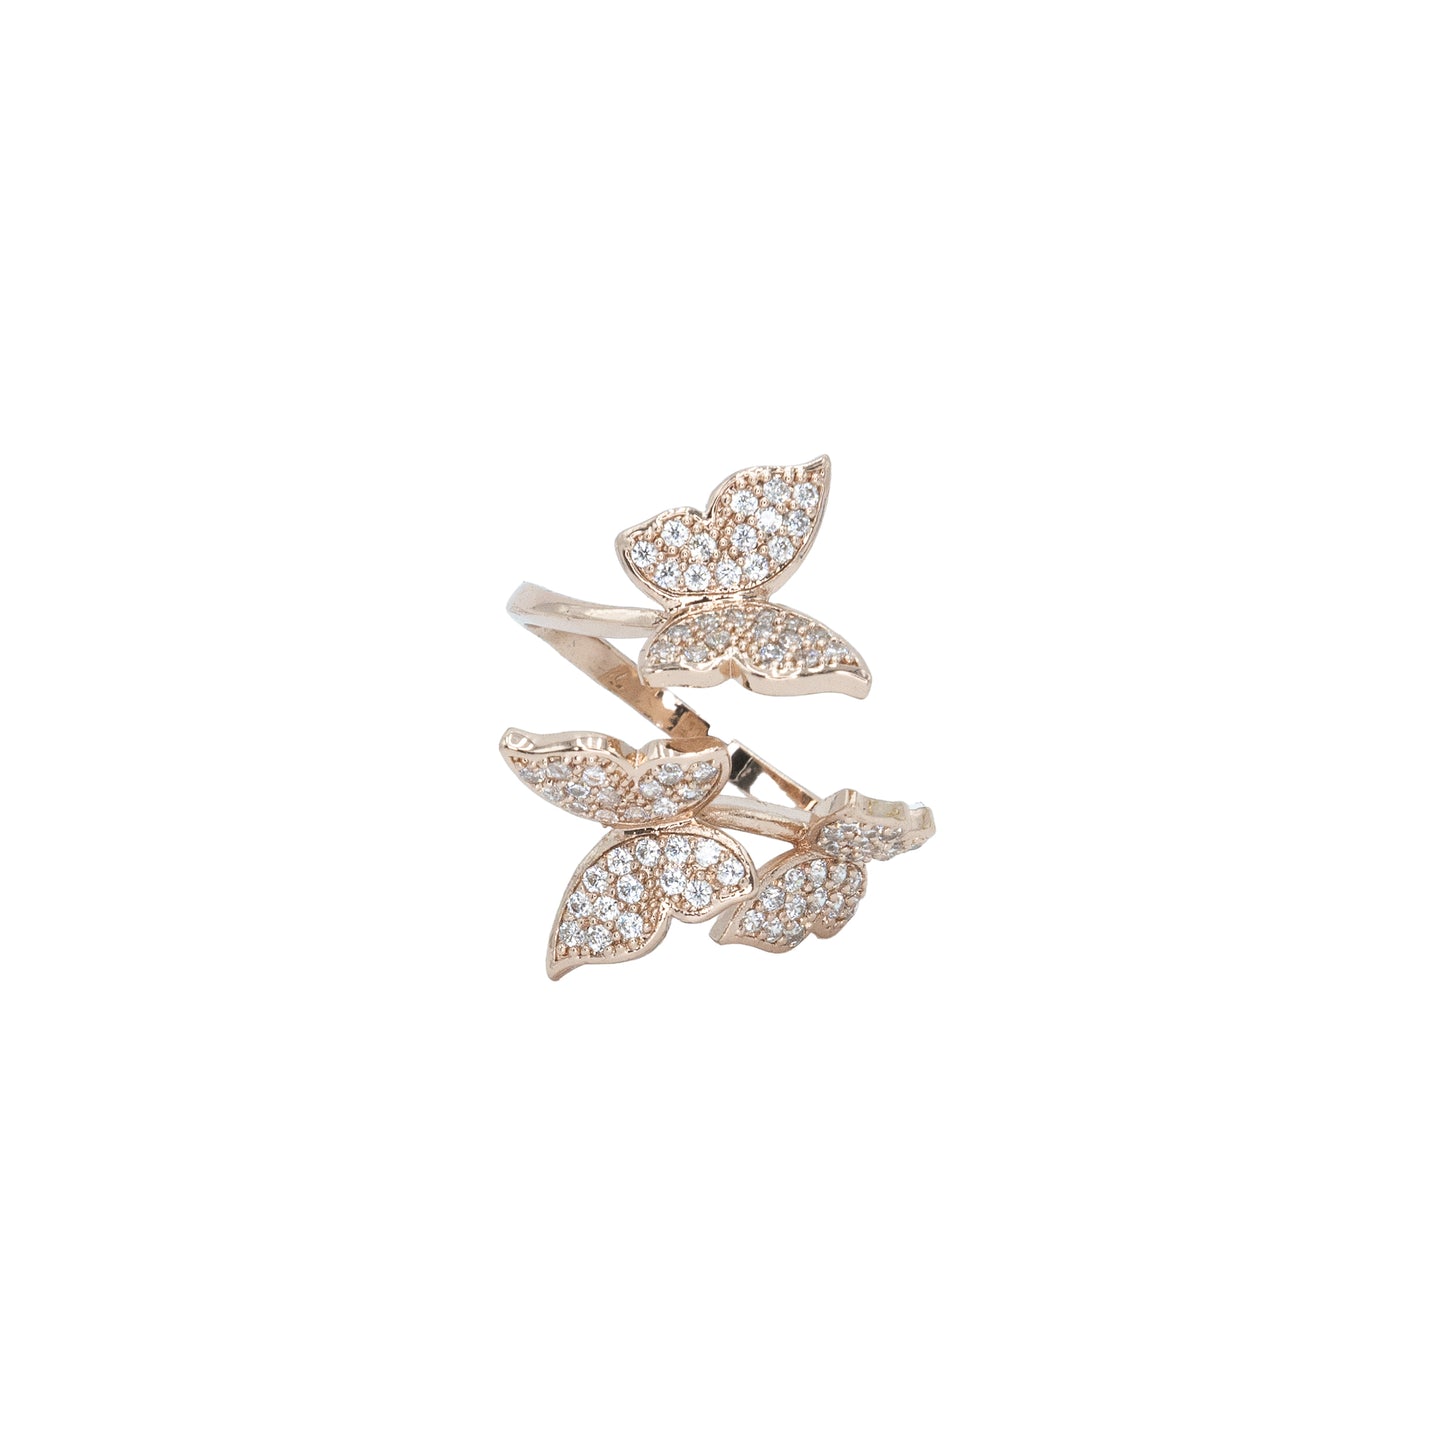 The Butterfly Soirée Ring in Rose Gold